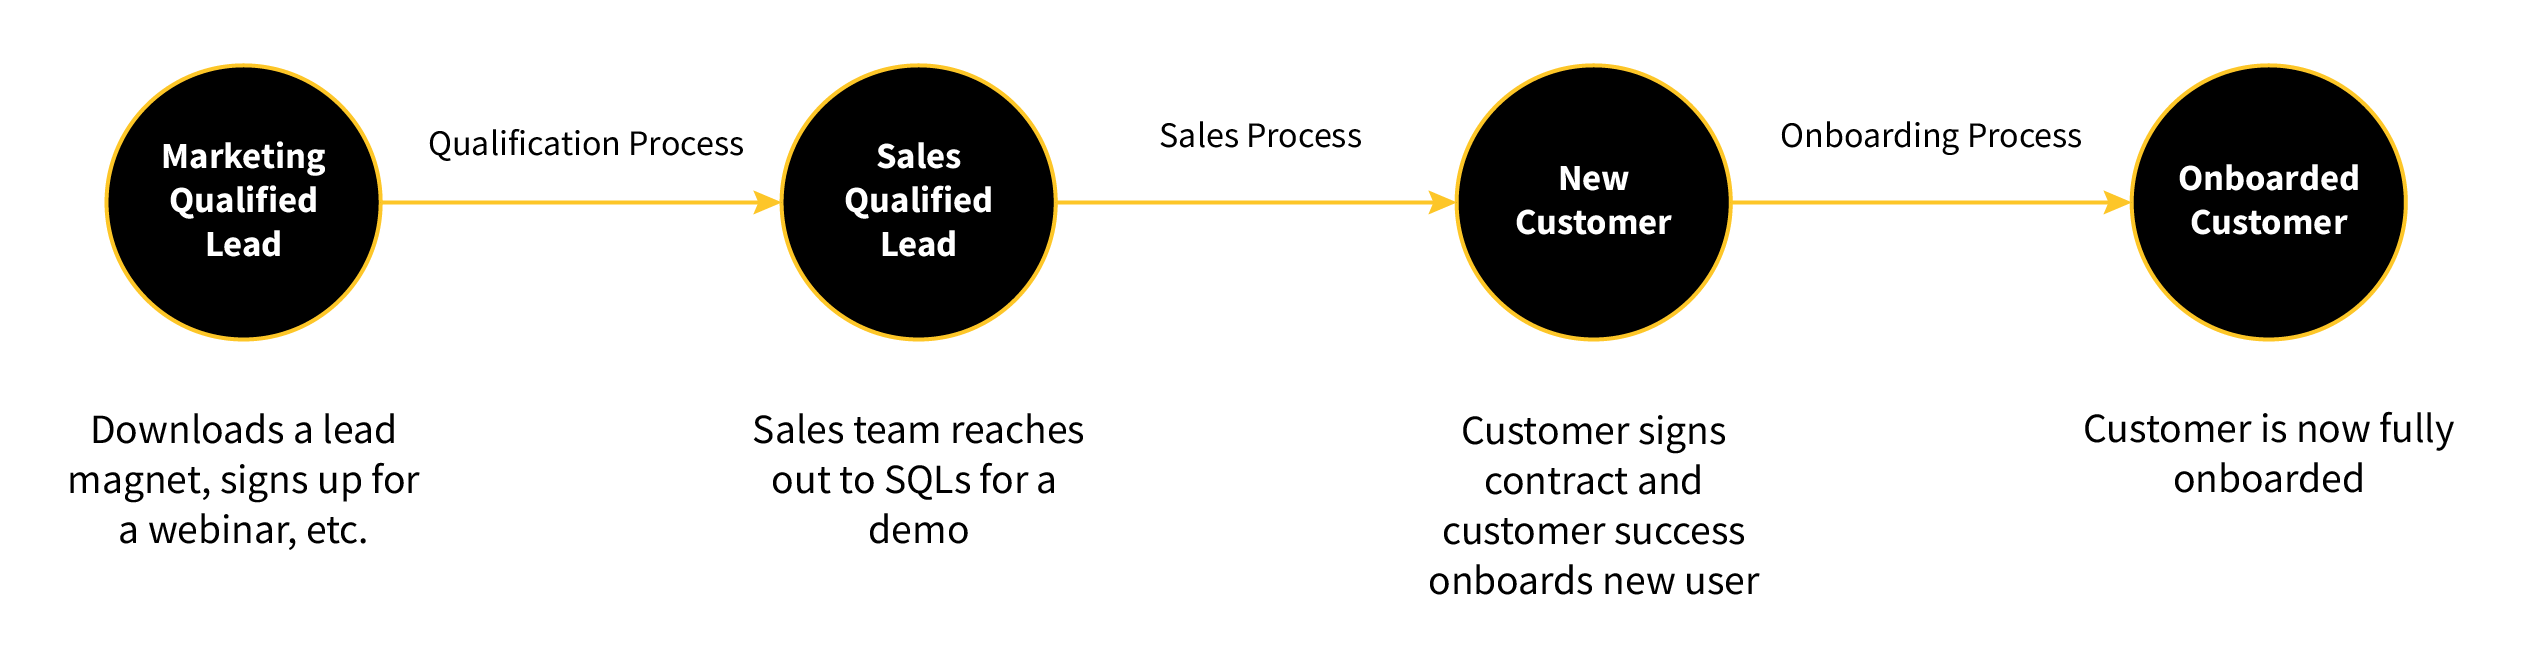 an image of the of the sales process